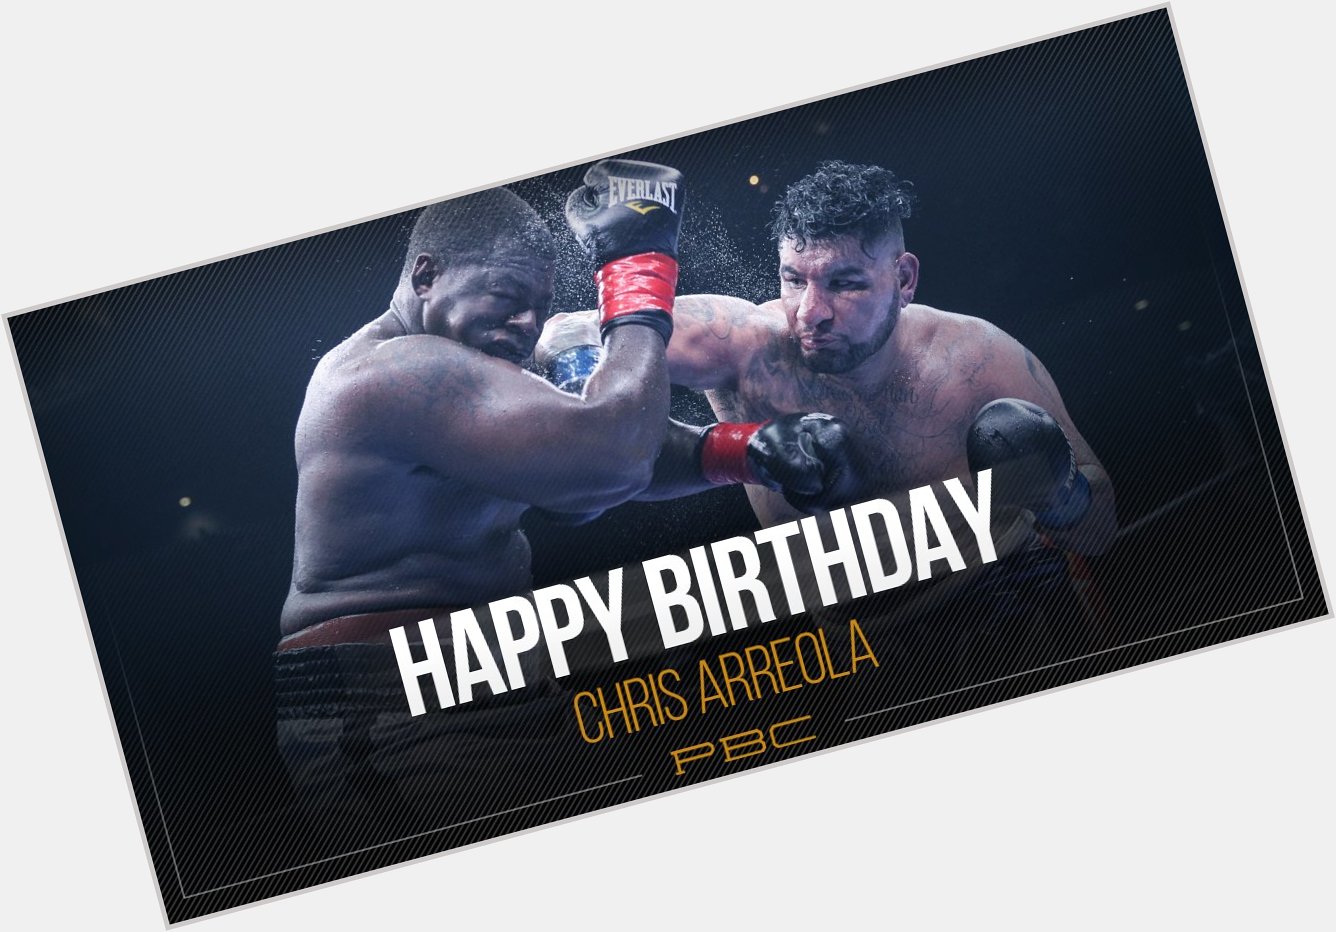 LIKE & to wish former heavyweight contender Chris Arreola a Happy Birthday!   